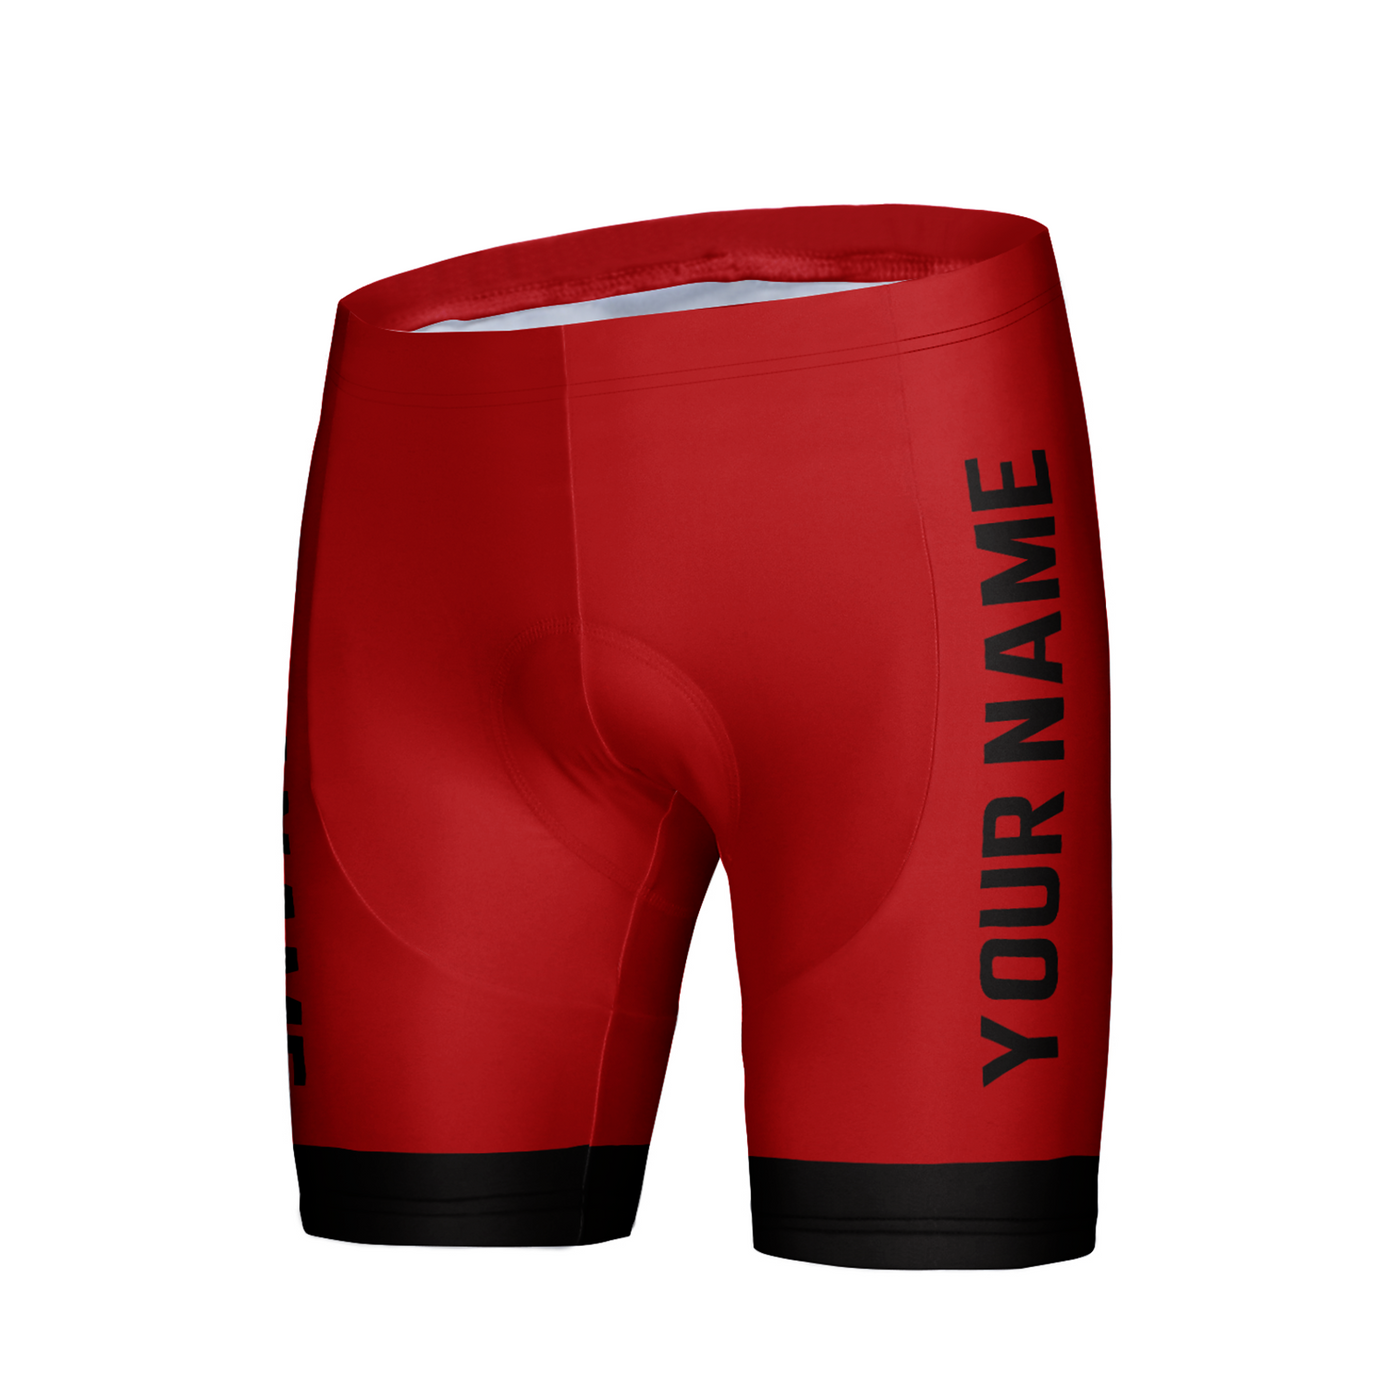 Customized Tampa Bay Team Unisex Cycling Shorts